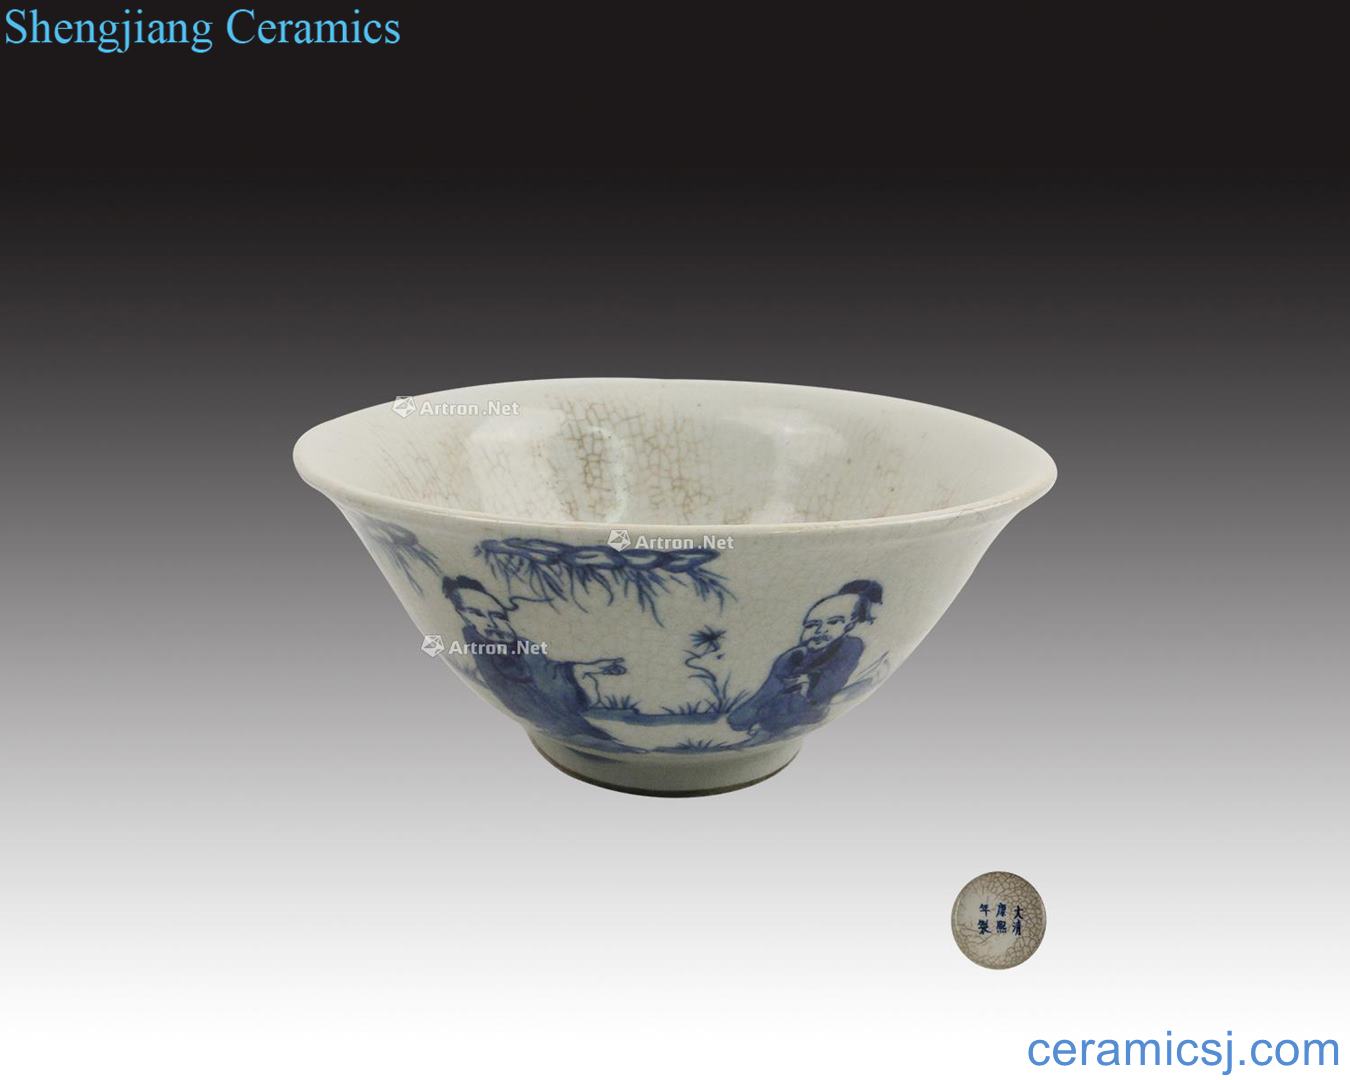 "The qing emperor kangxi in the qing dynasty years" character lines to bowl